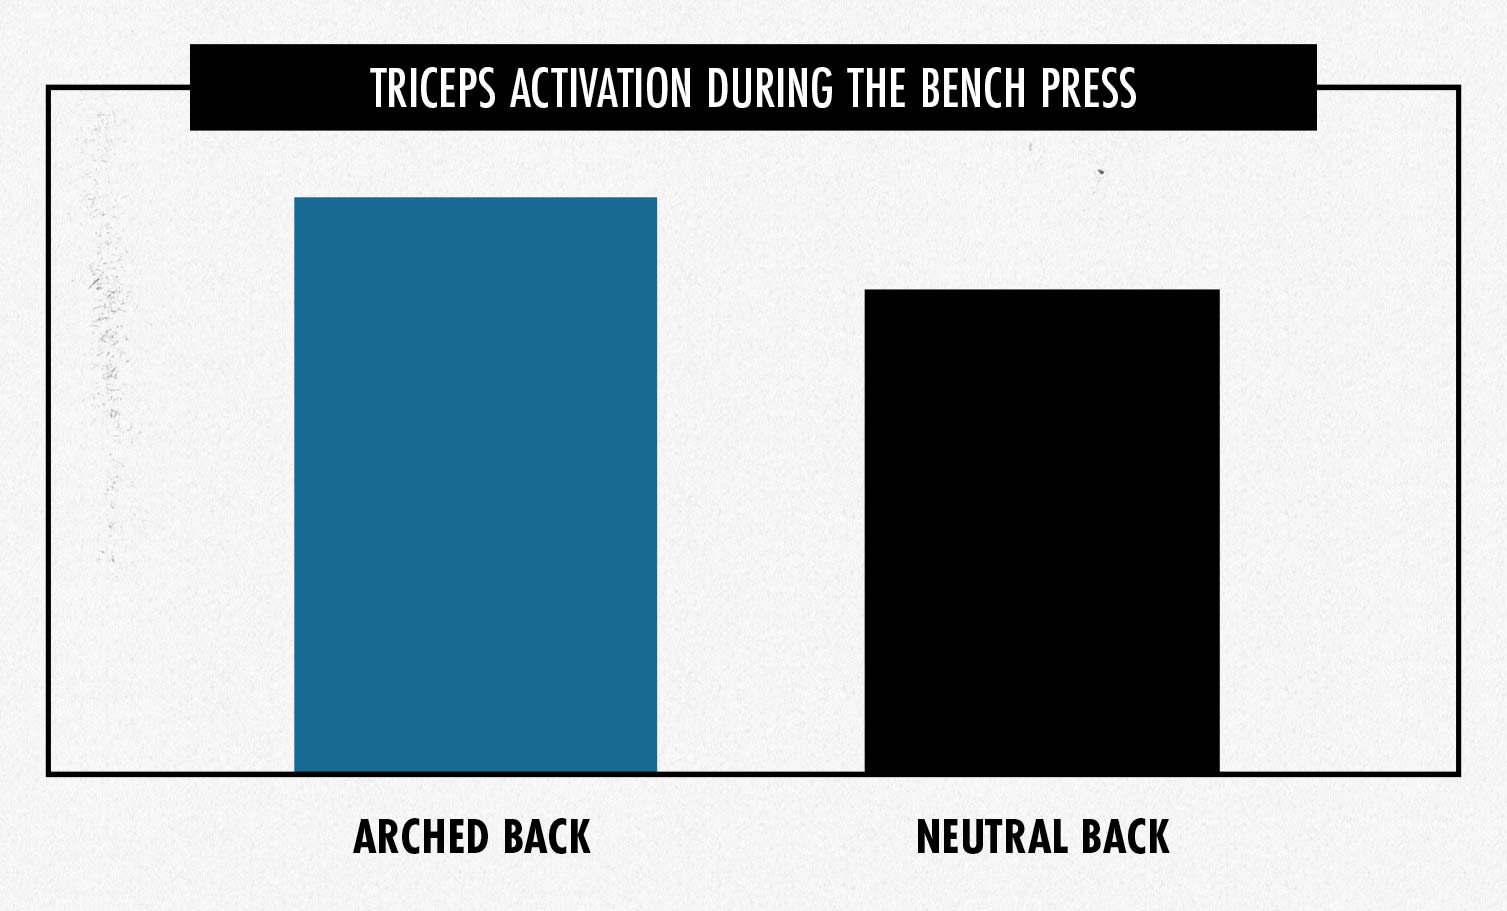 Illustration showing that arching your back on the bench press increases triceps activation.